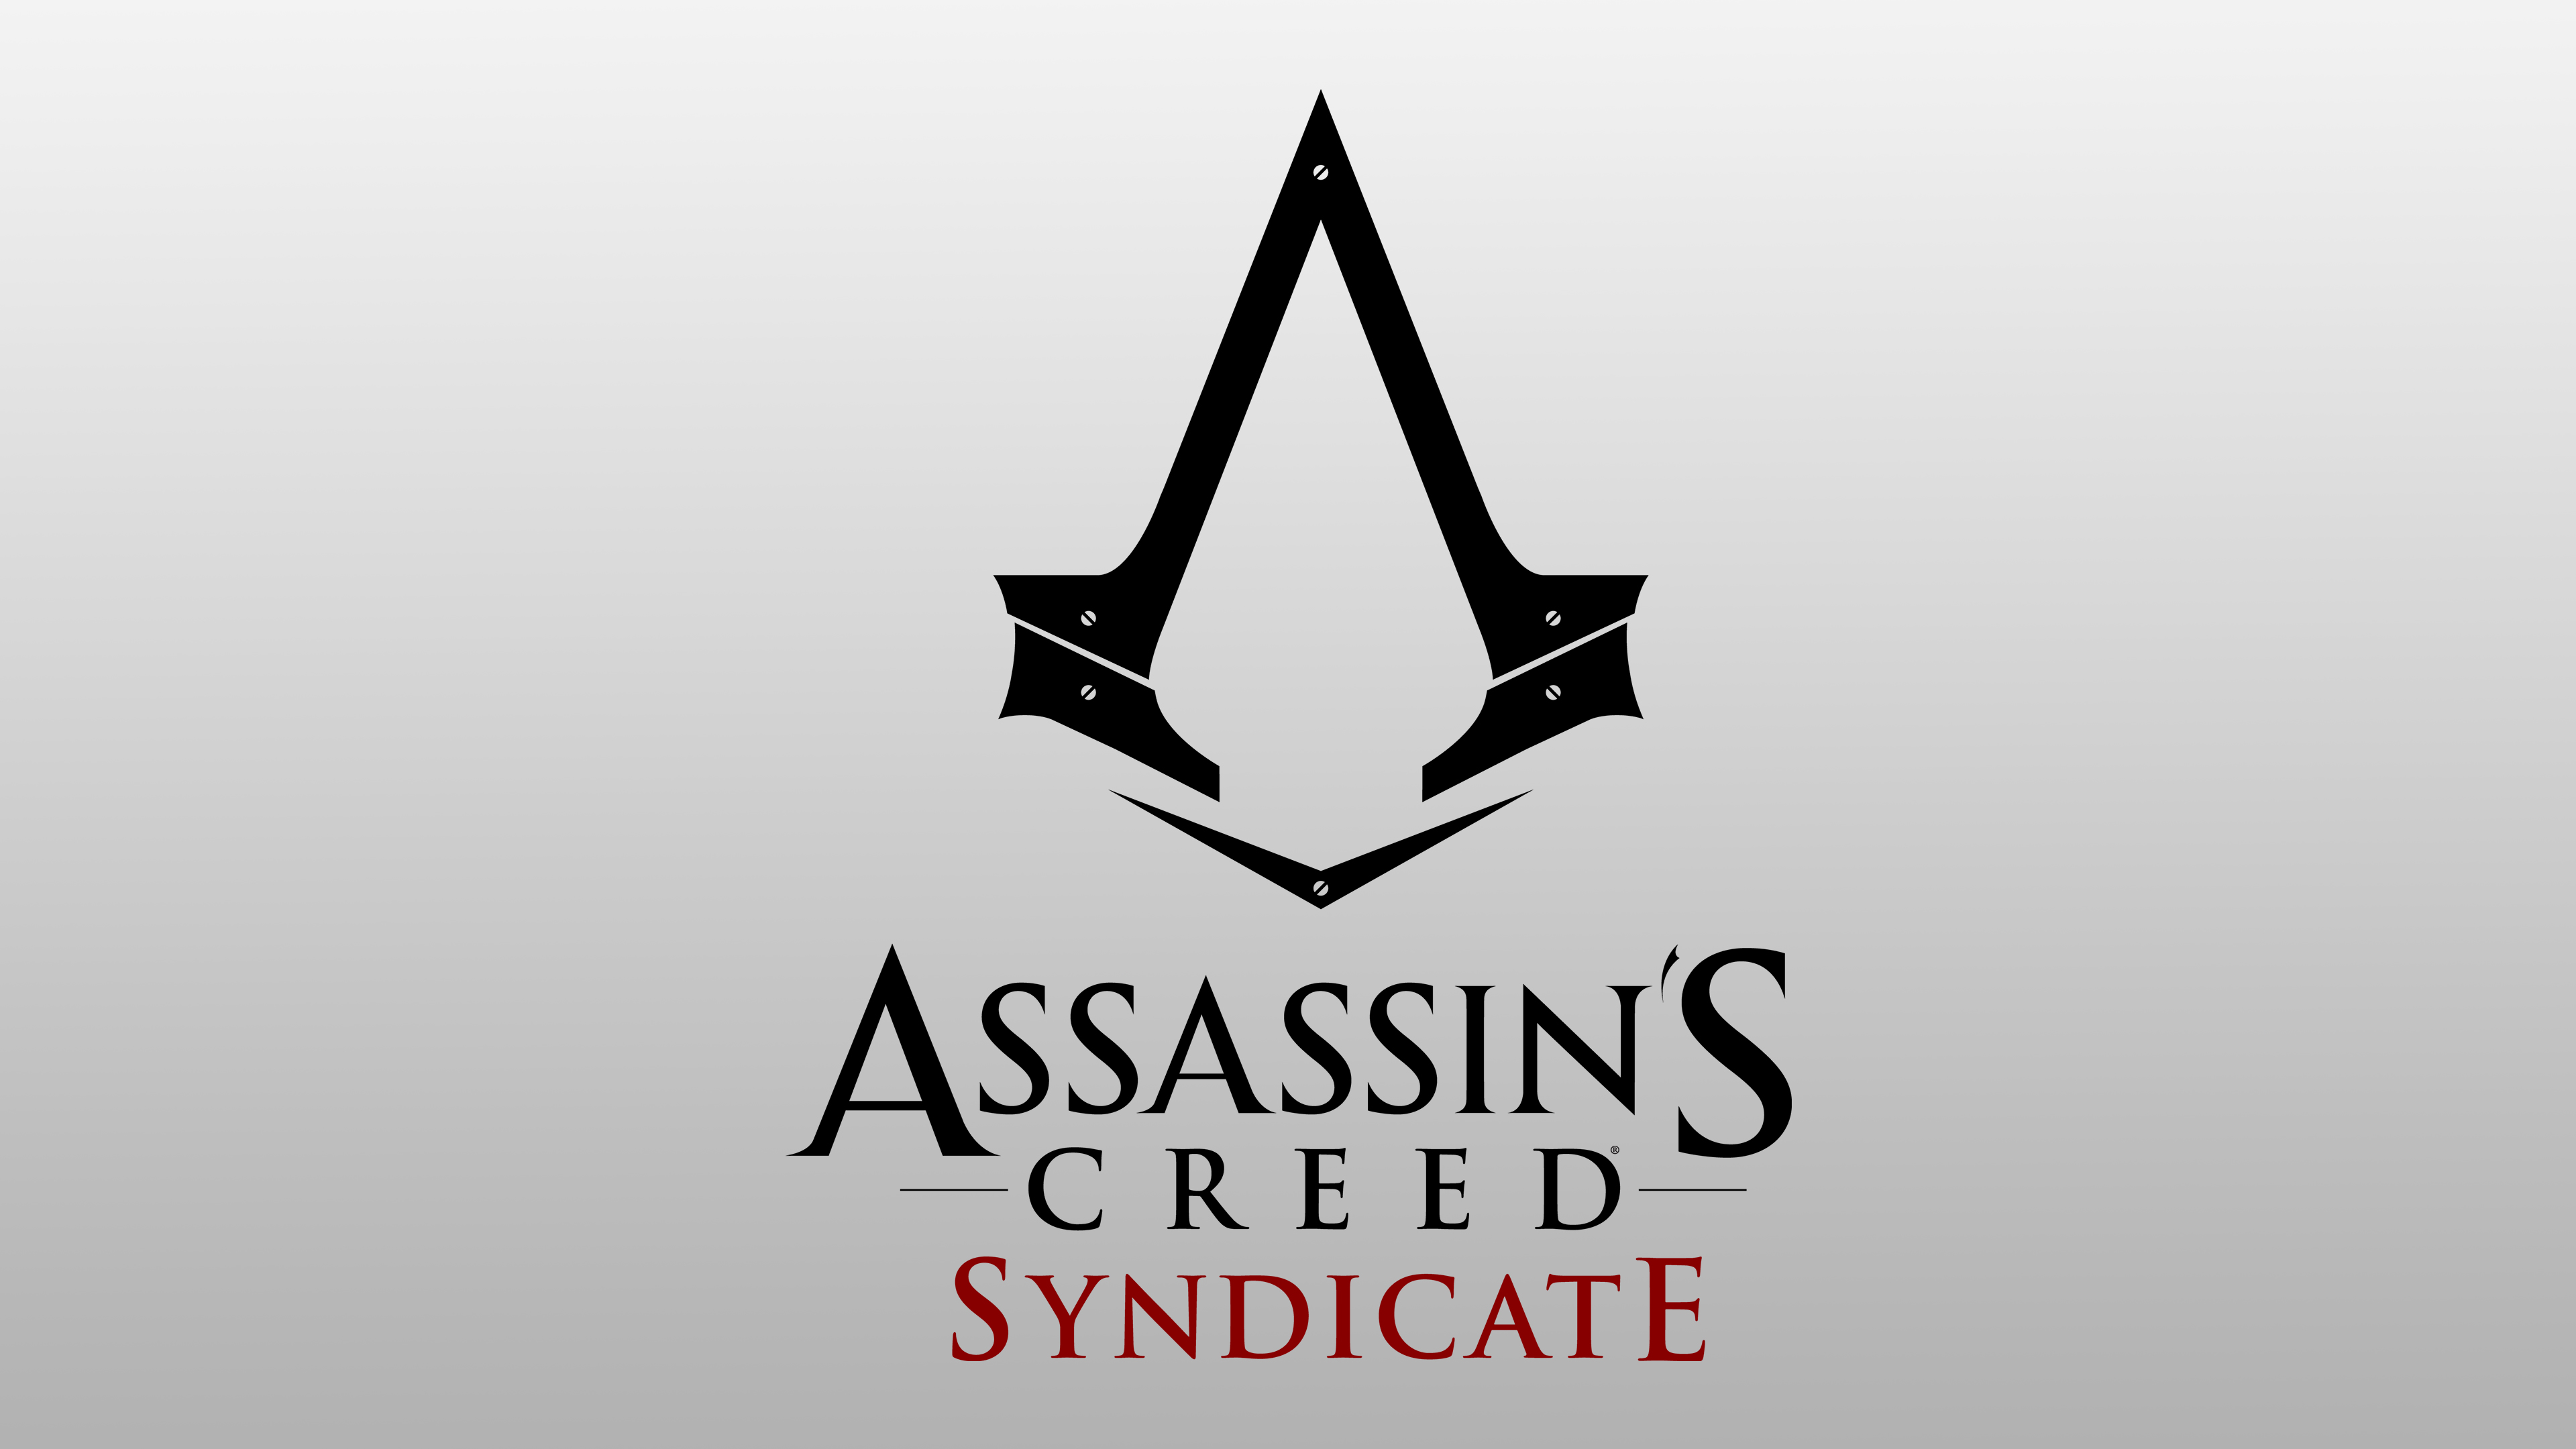 video game, assassin's creed: syndicate, logo, assassin's creed Ultra HD, Free 4K, 32K